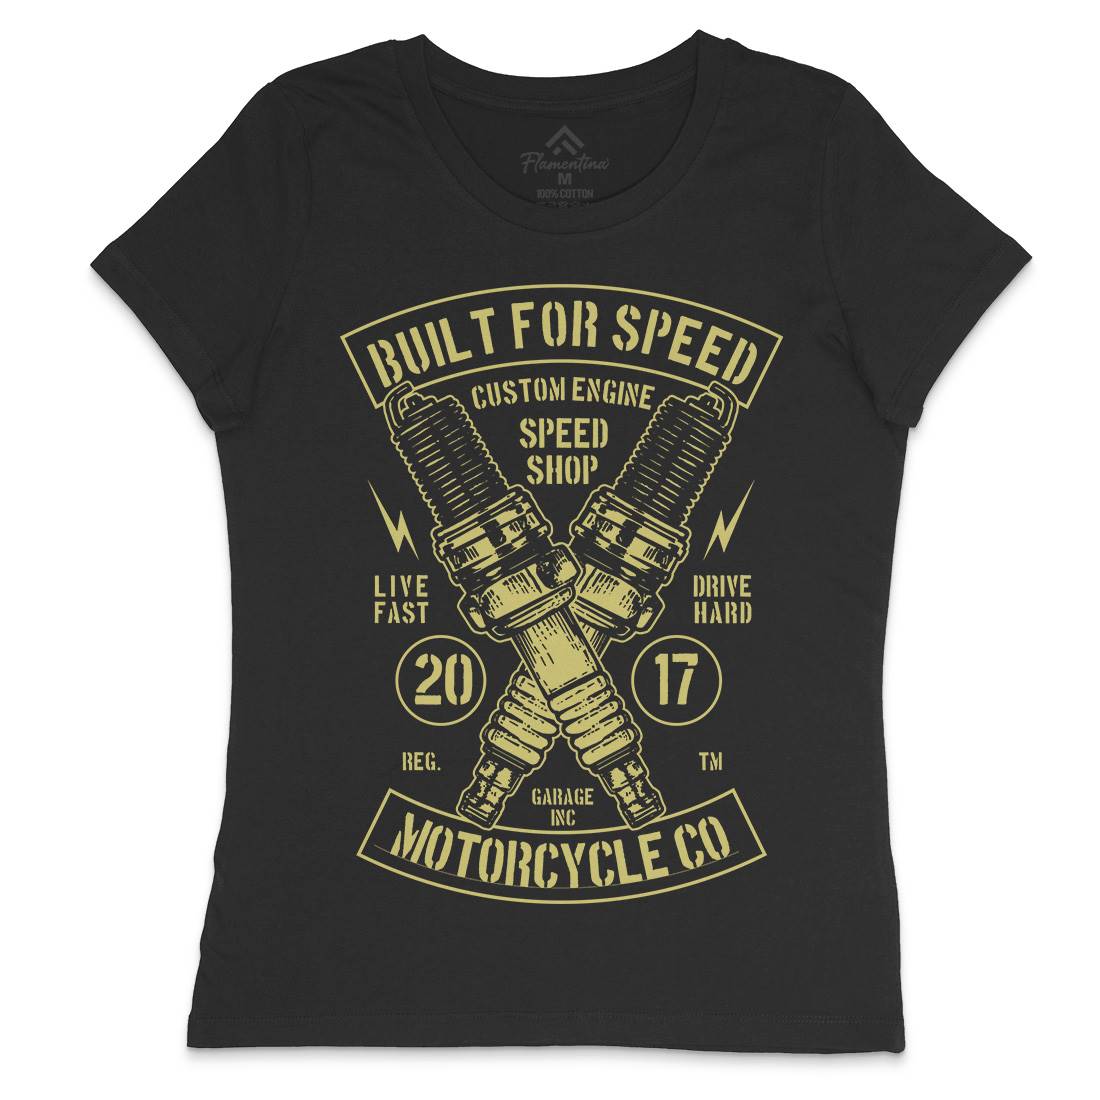 Built For Speed Womens Crew Neck T-Shirt Motorcycles B188